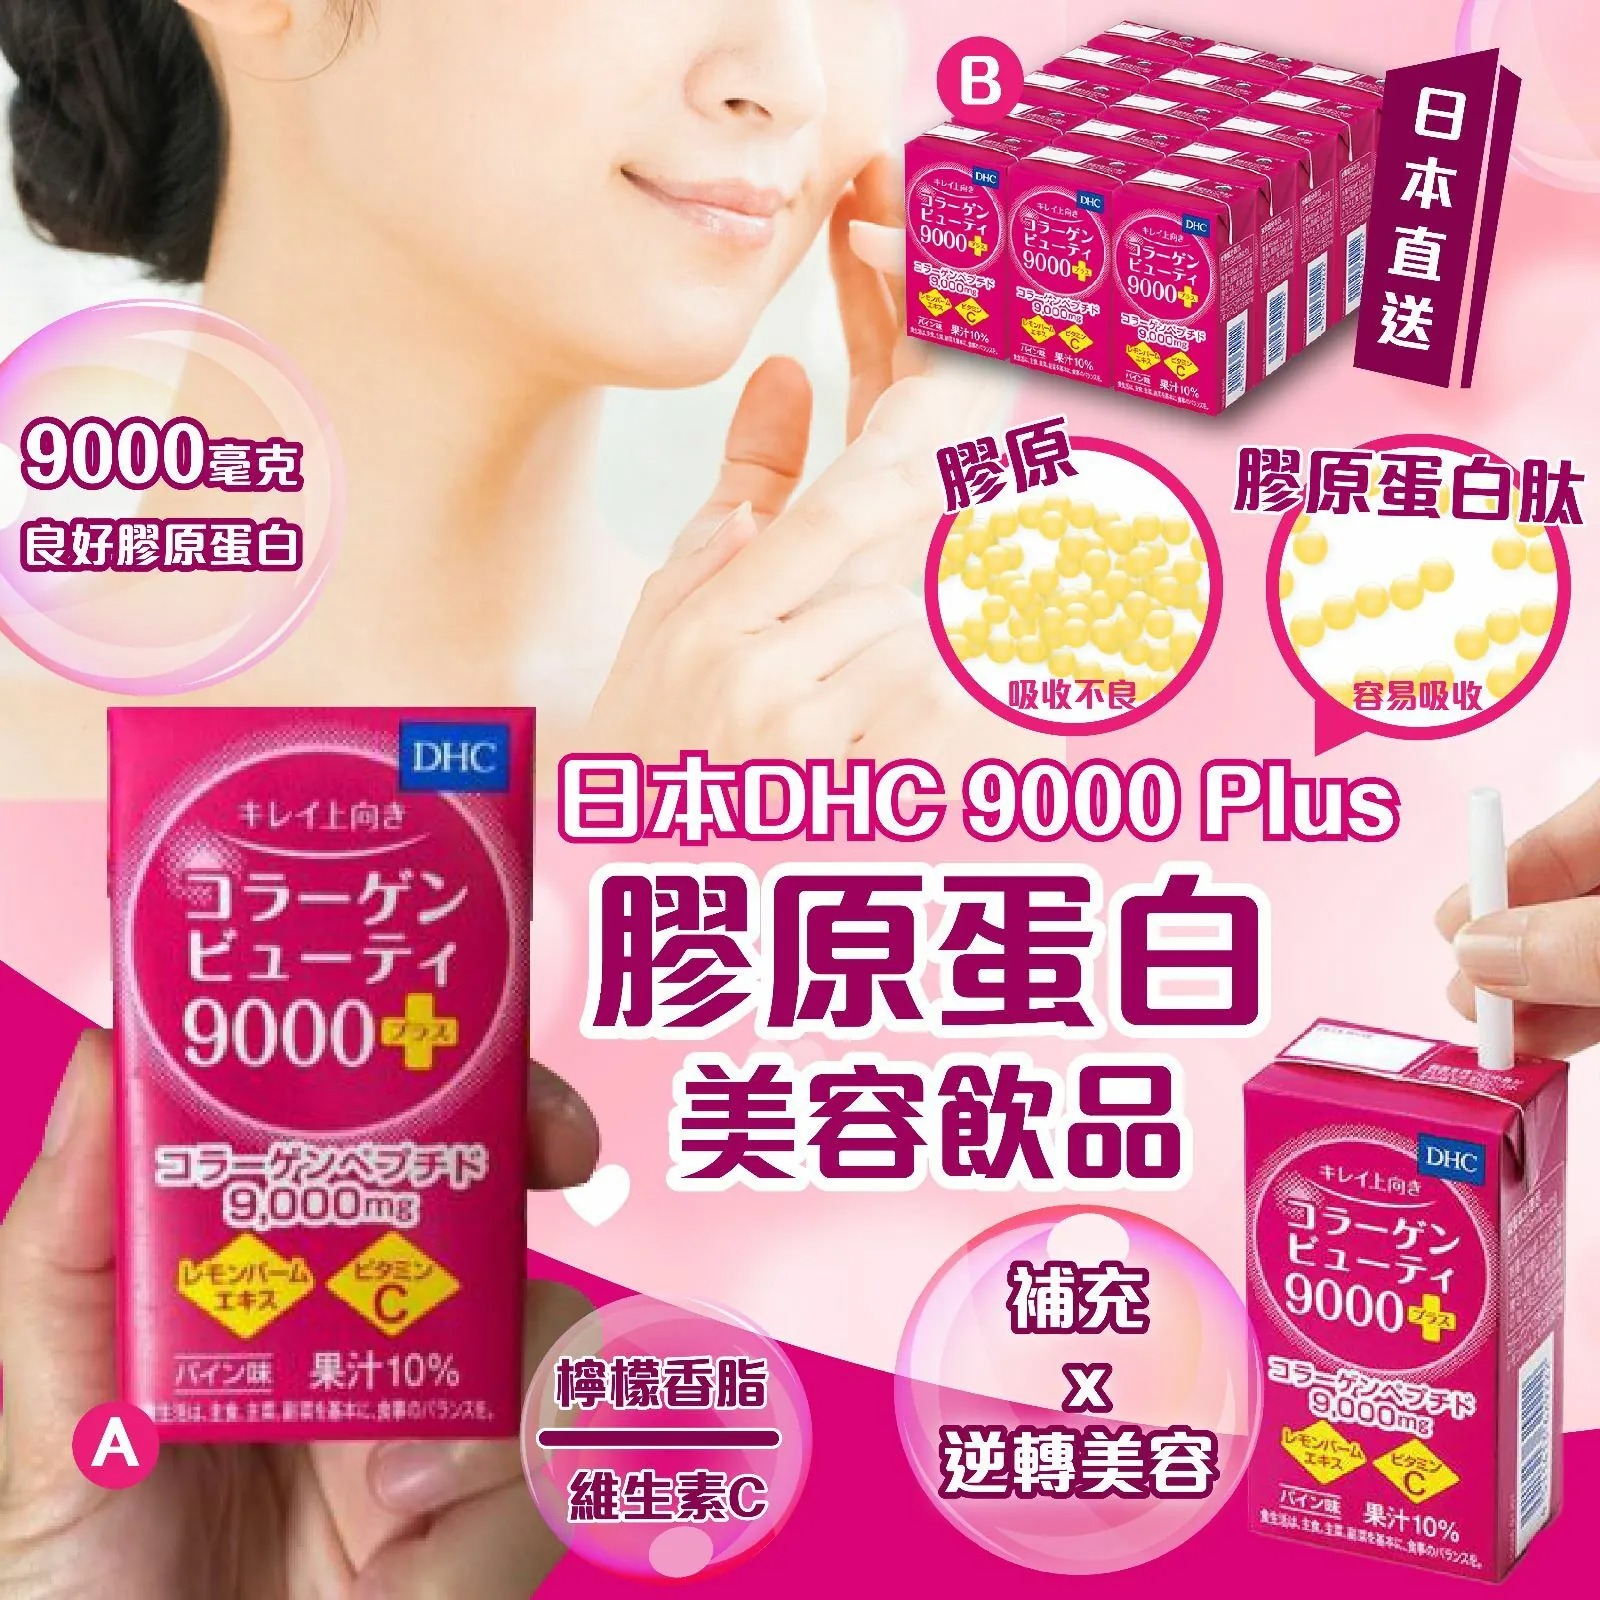 review nuoc uong dhc collagen 9000mg plus nhat ban noi dia